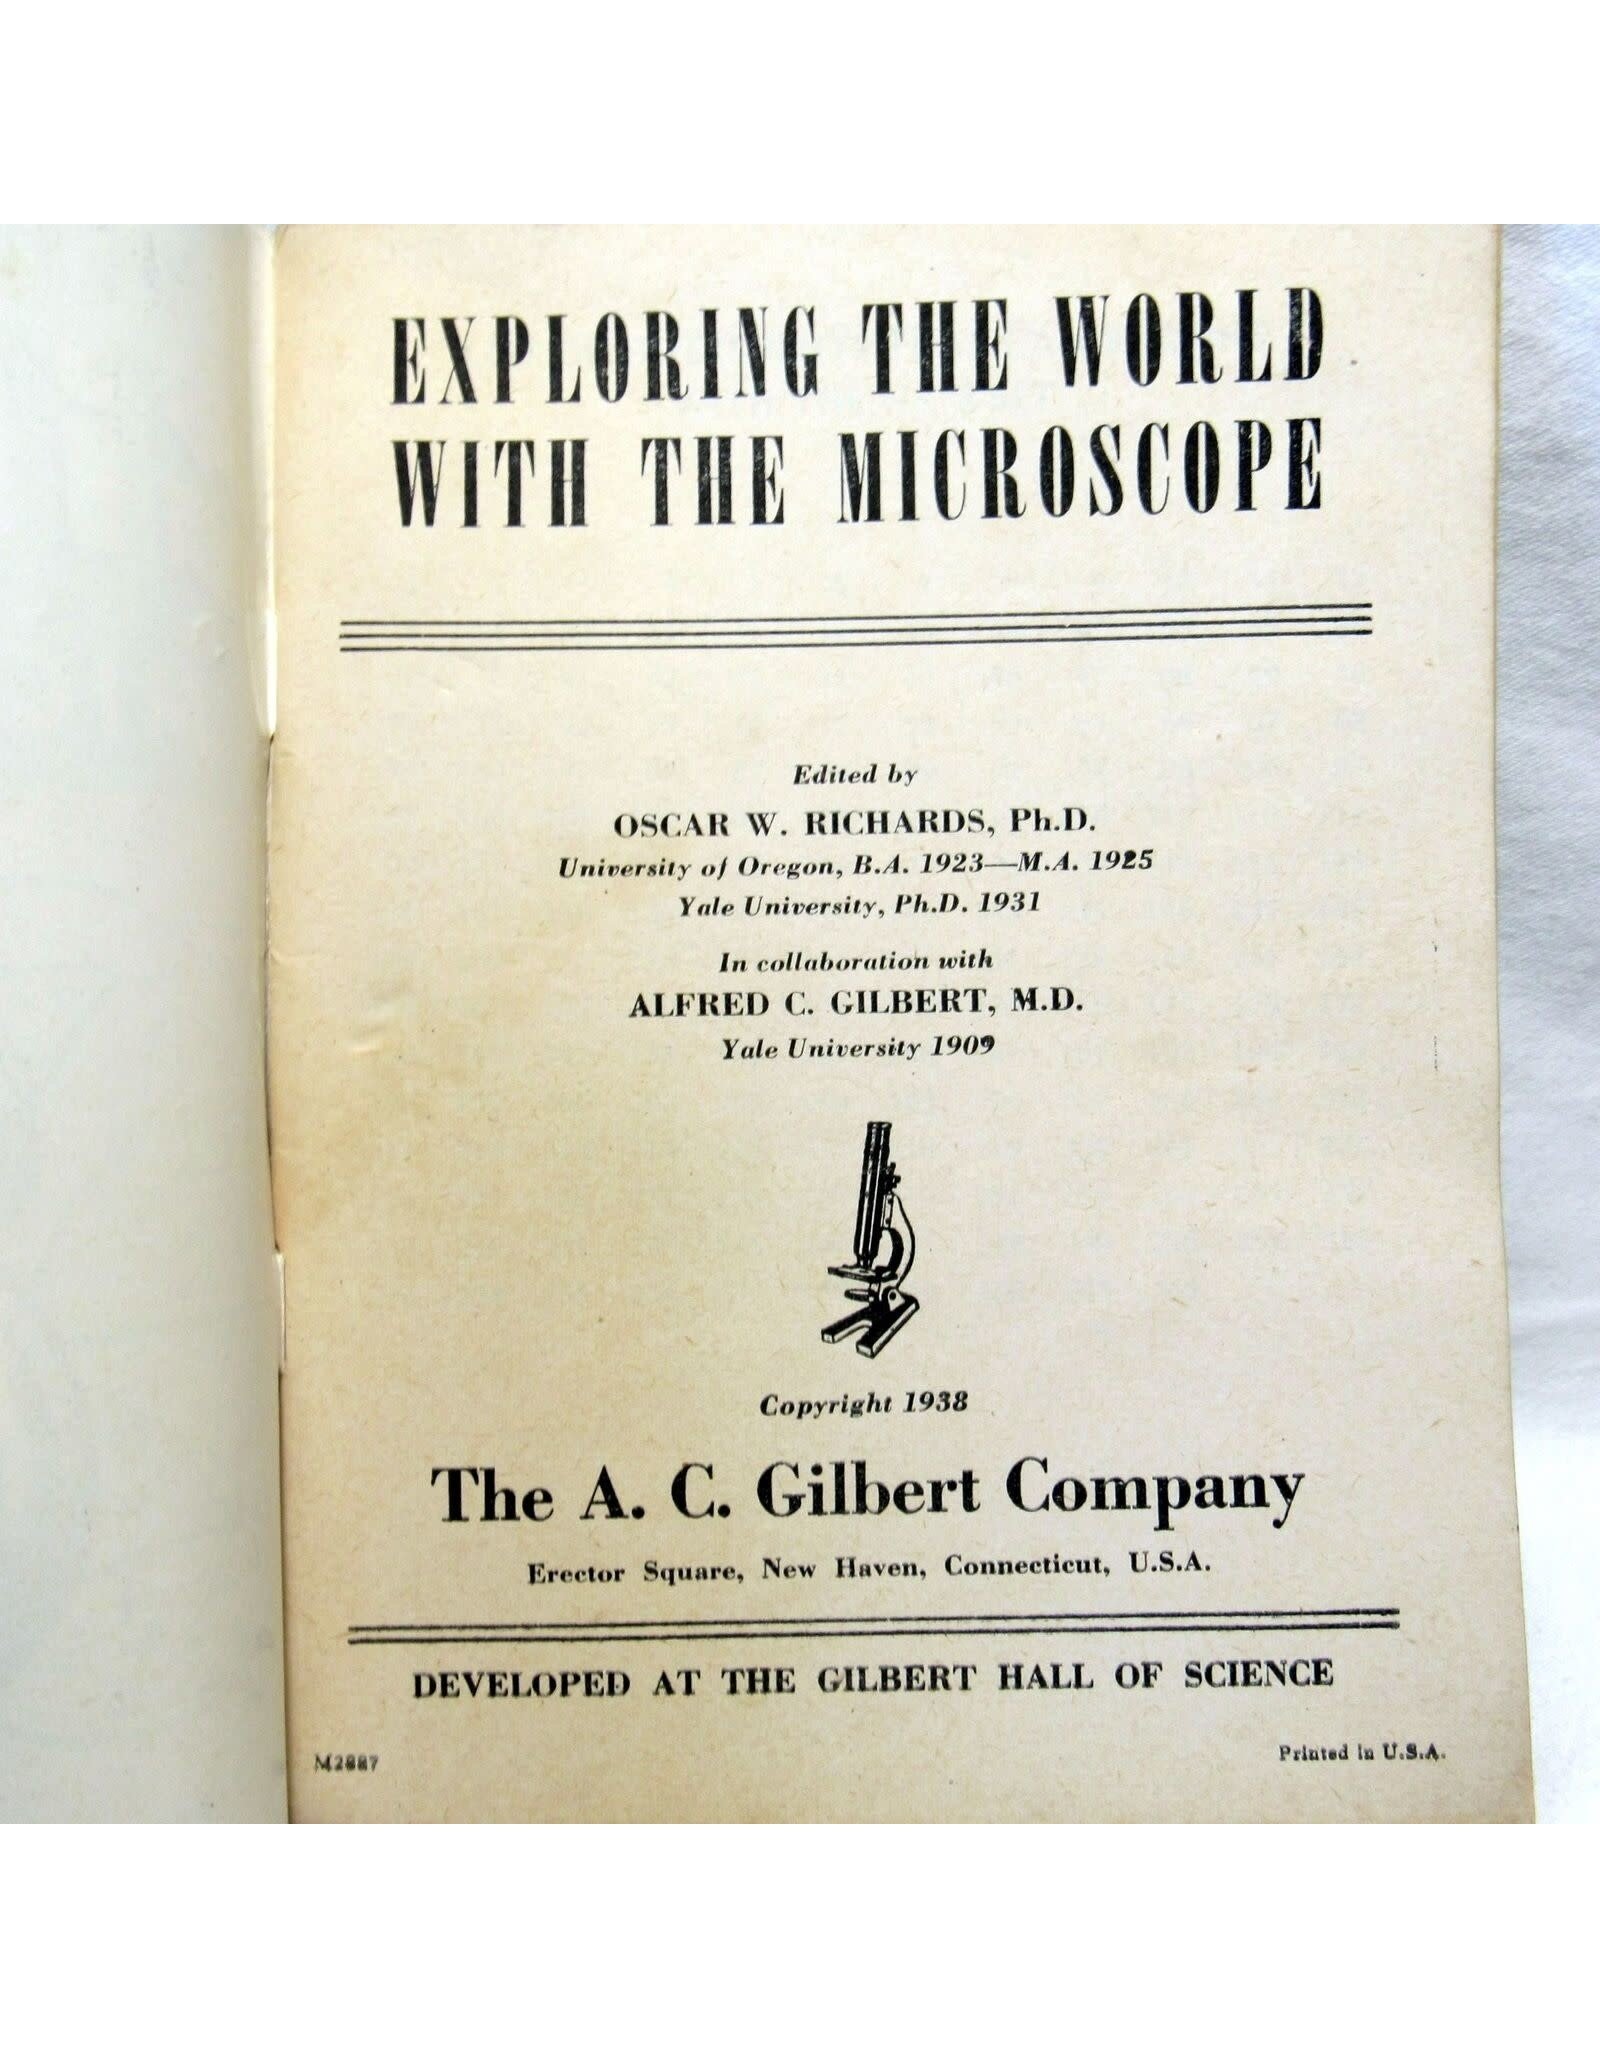 How To Use The Gilbert Microscope